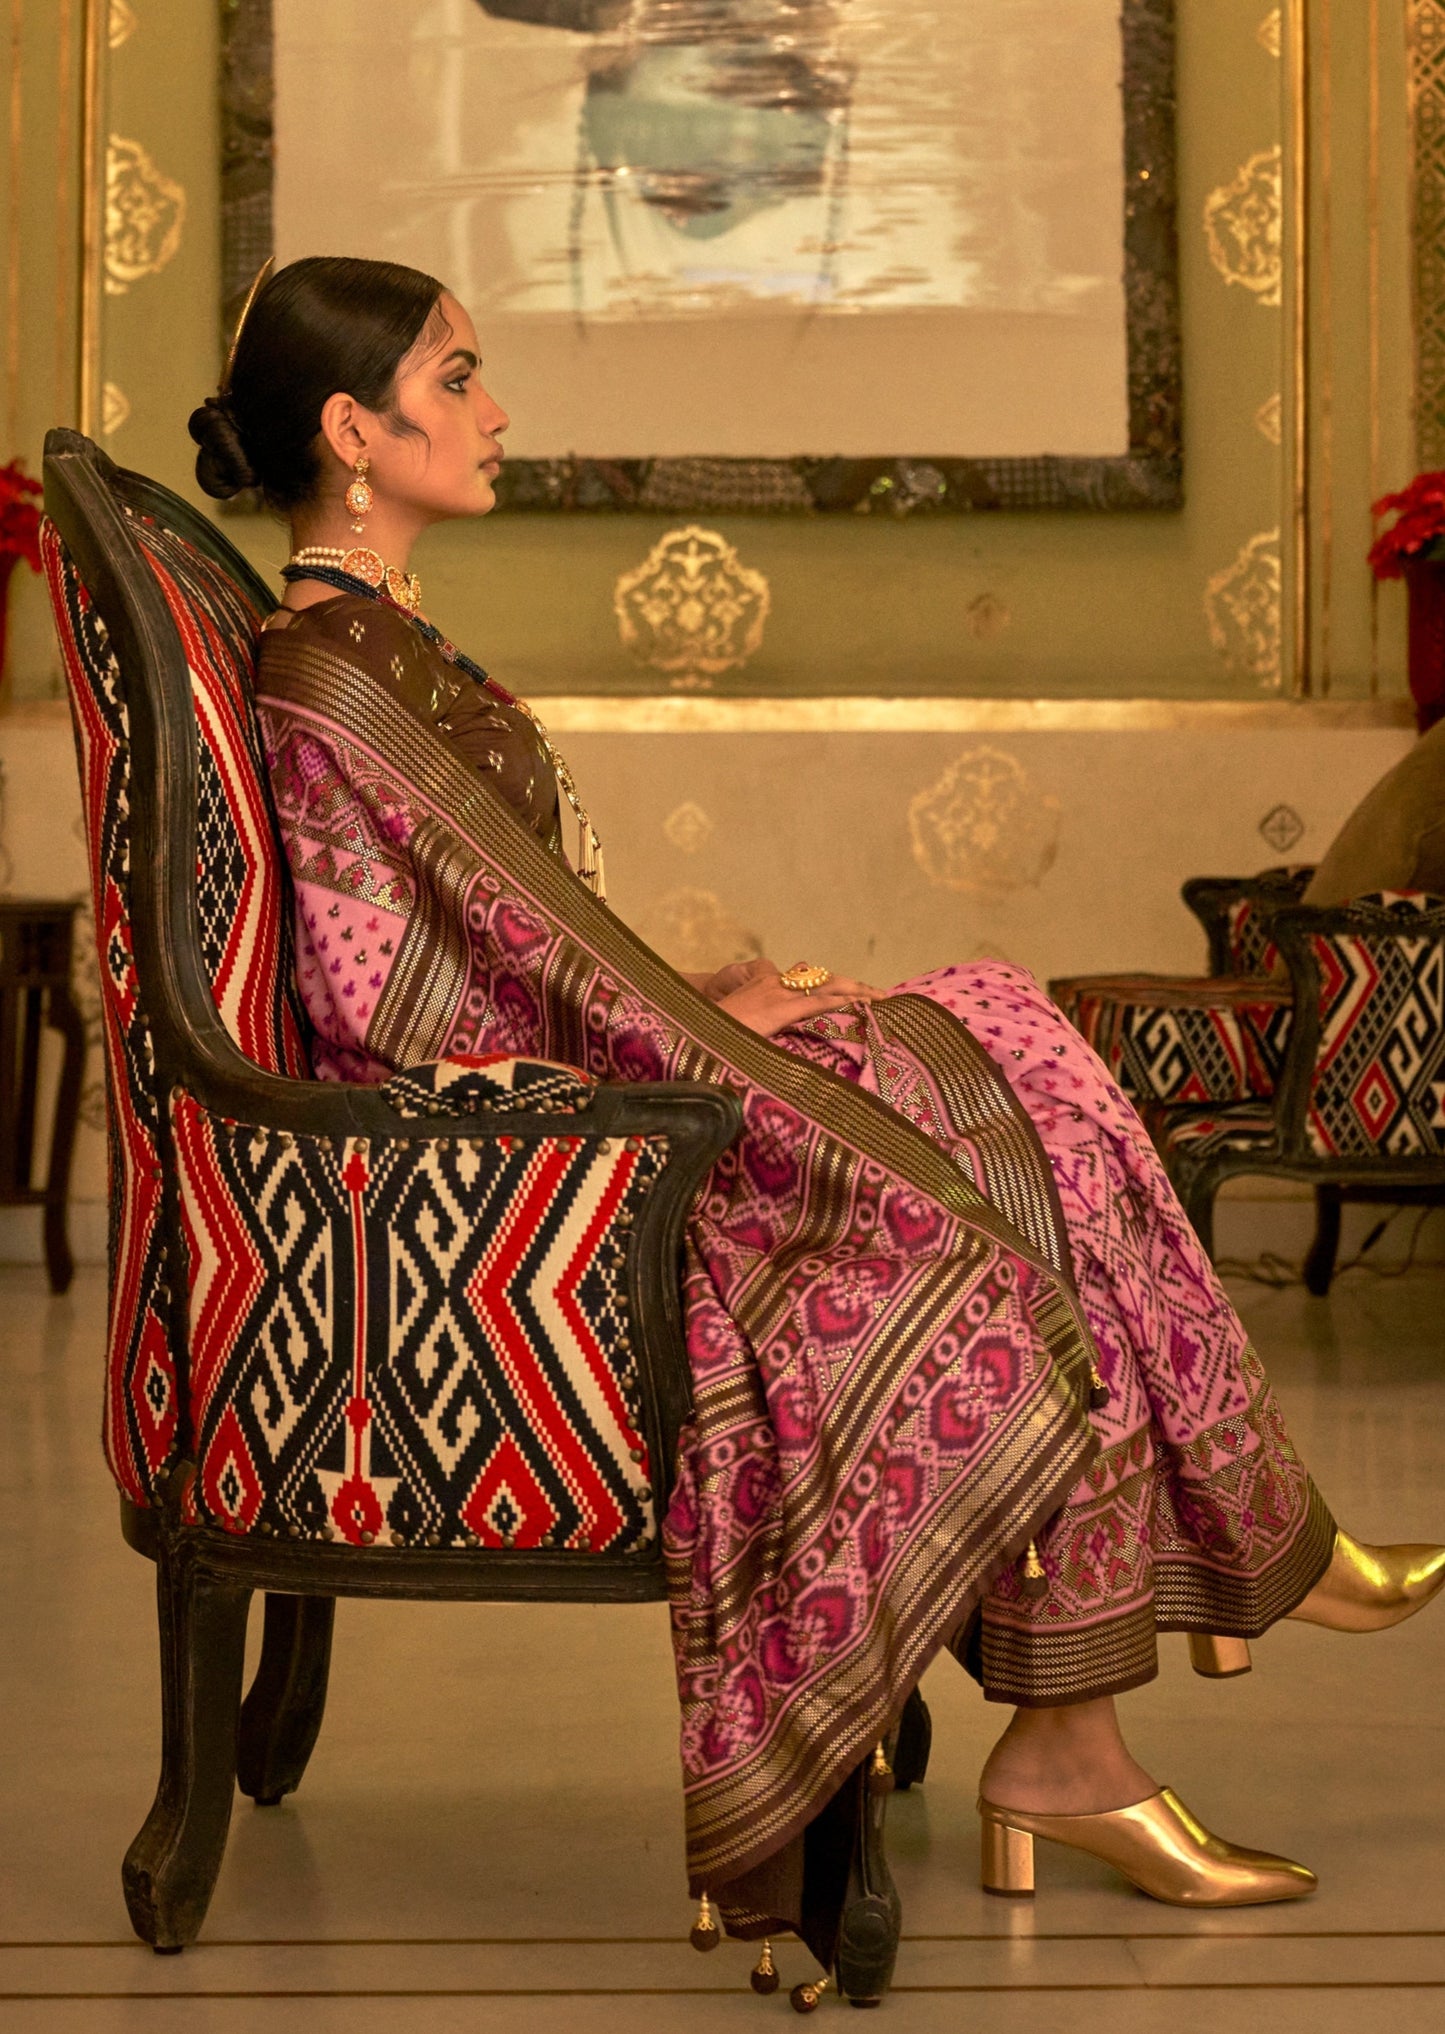 Woman in pink color Patola Saree sitting in chair